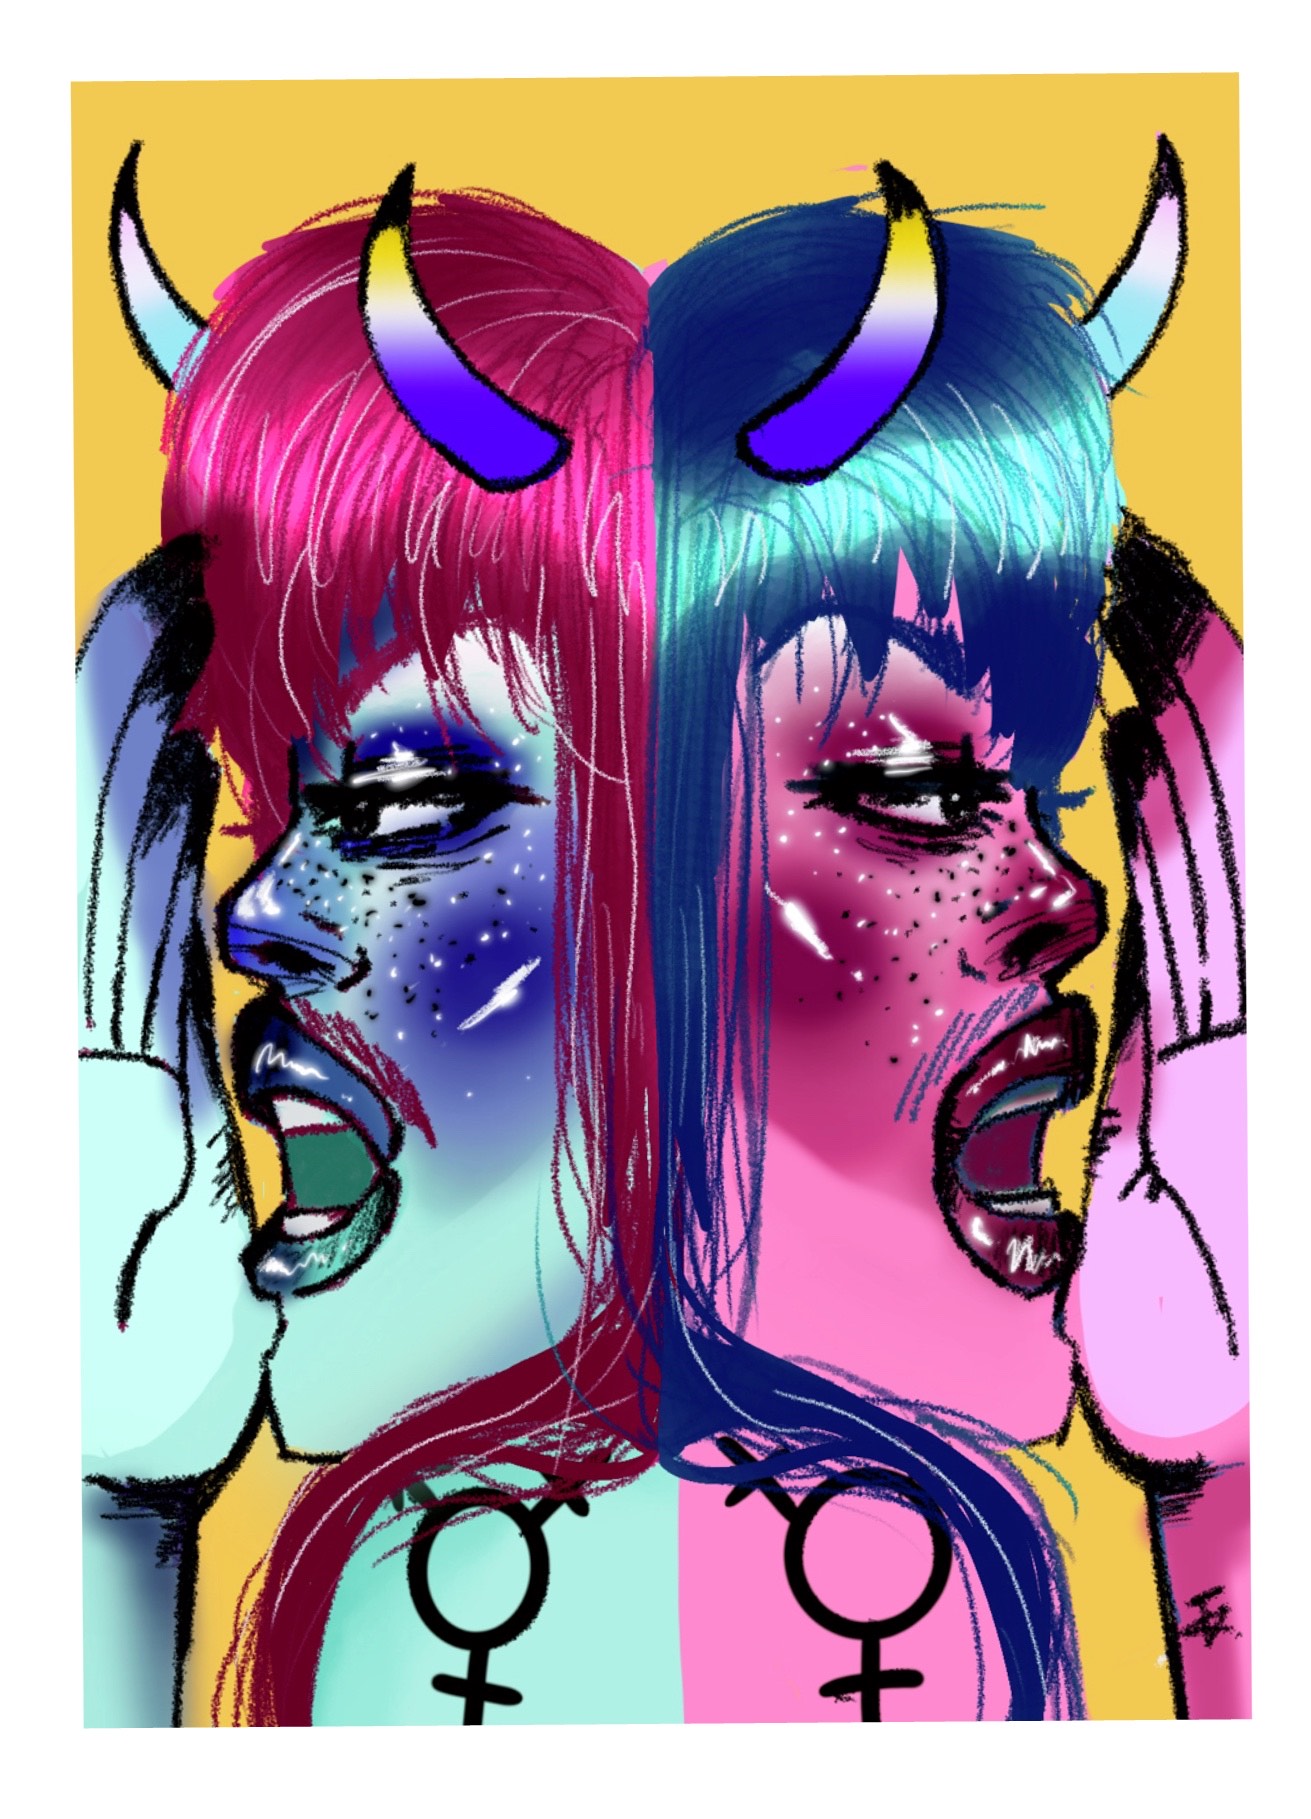 Two figures, back to back. They have their hands to their mouths as if shouting. They horns in nonbinary and trans flag colours.